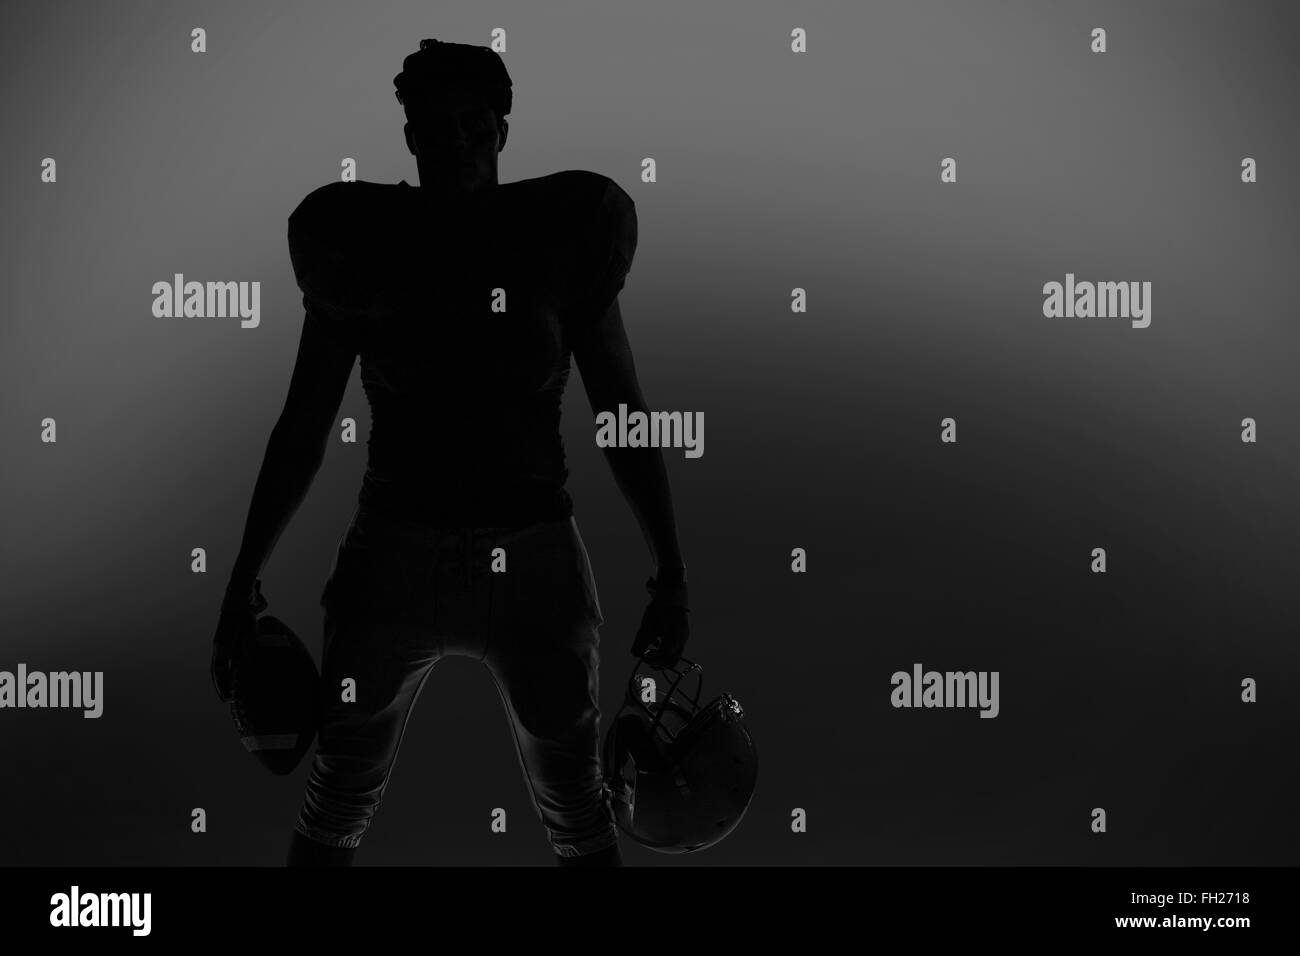 Silhouette American football player holding ball et le casque Banque D'Images